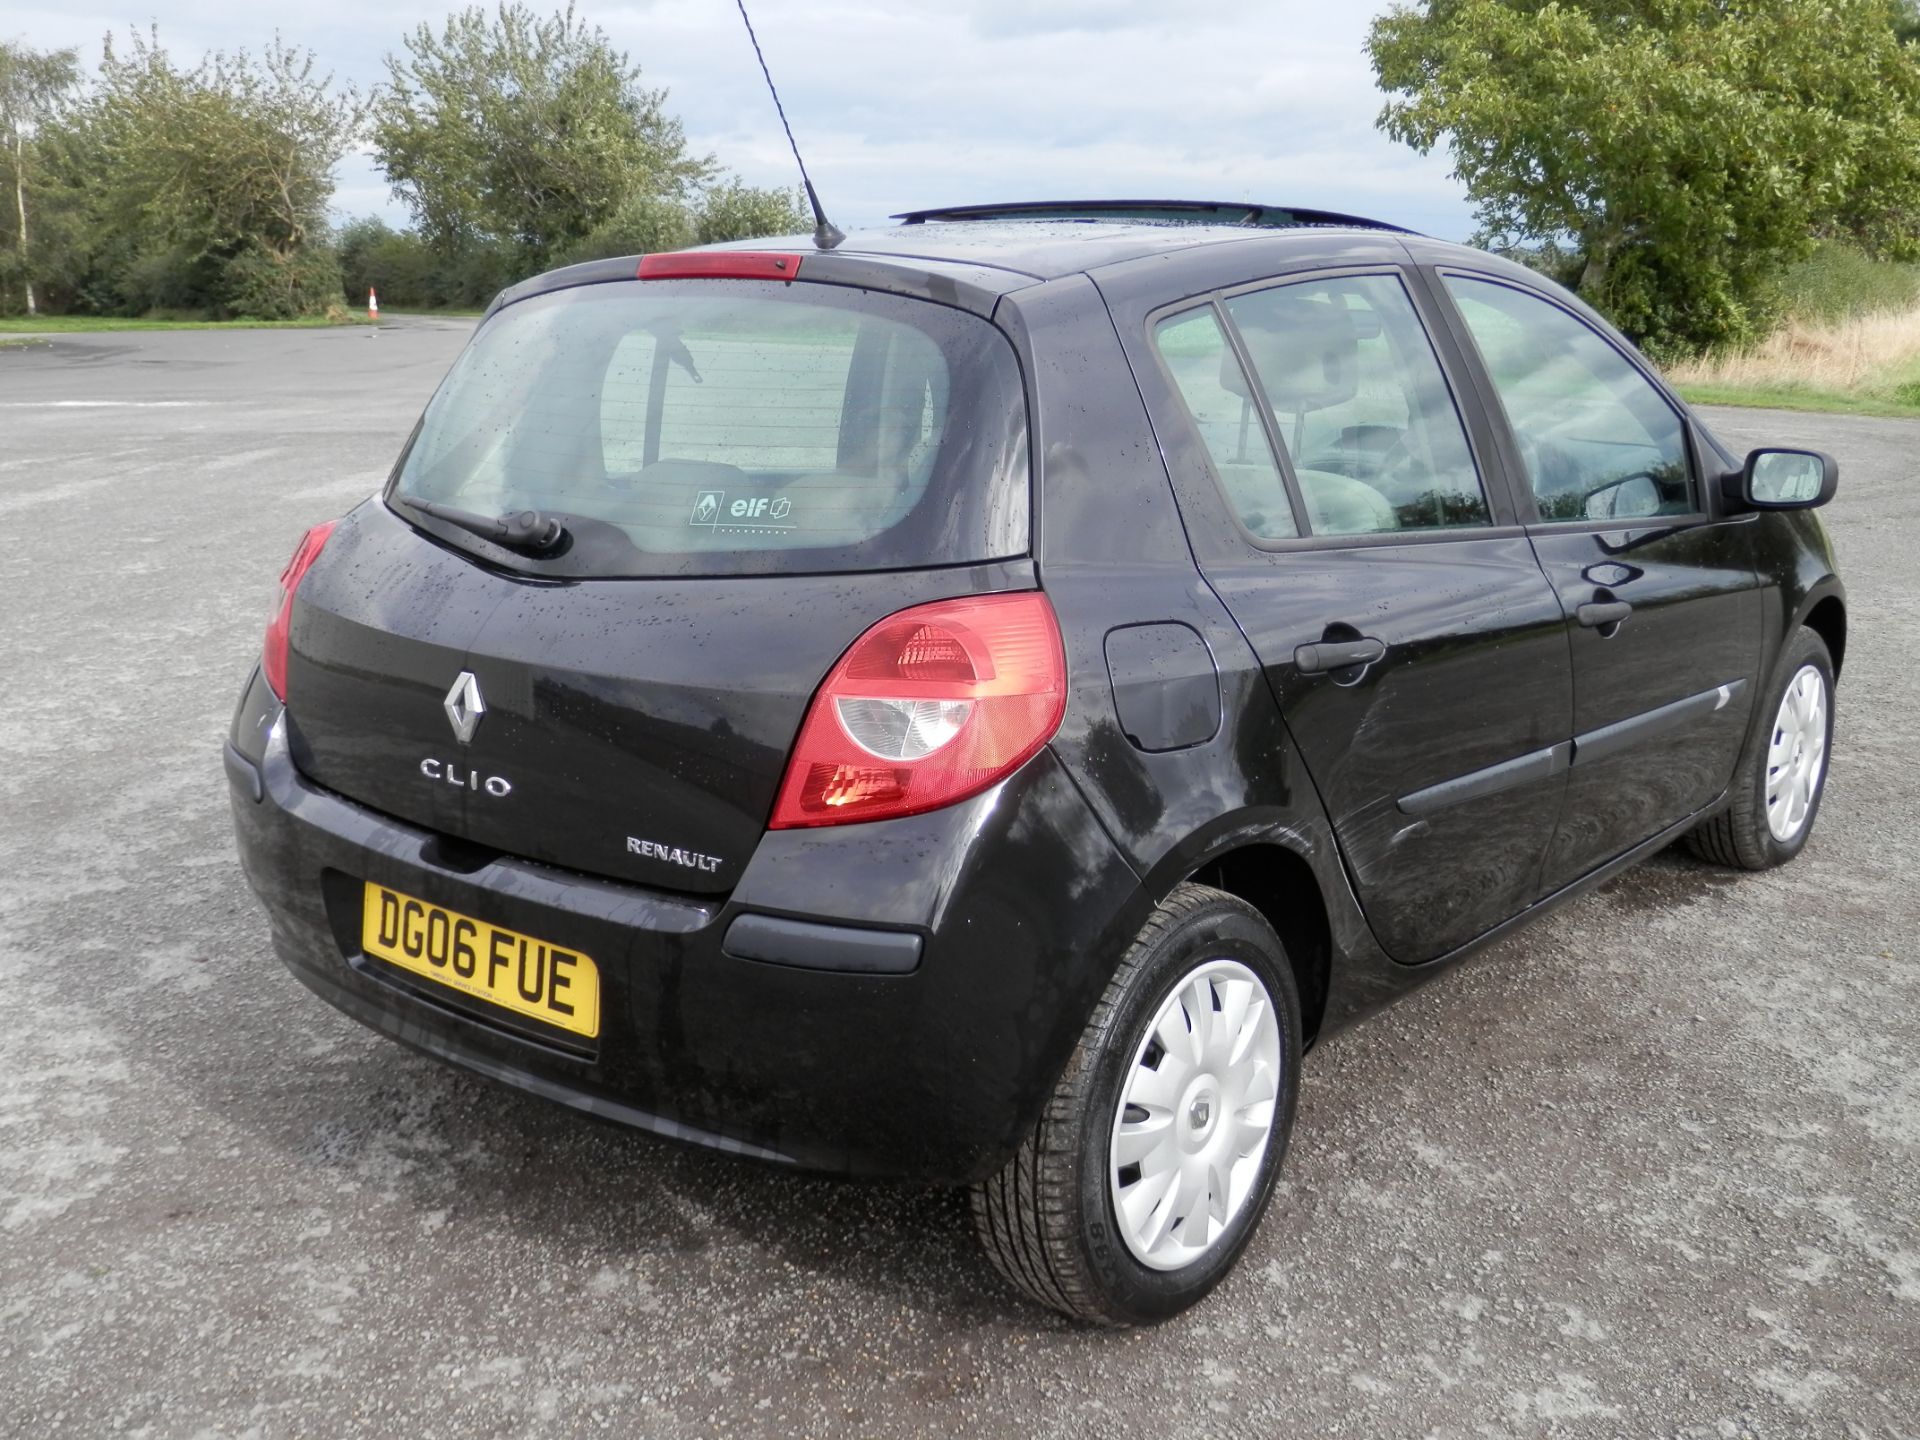 06/2006 RENAULT CLIO (FACELIFT MODEL) 1.4 EXPRESSION 16 VALVE, AIR CON, ONLY 47K MILES WARRANTED. - Image 4 of 26